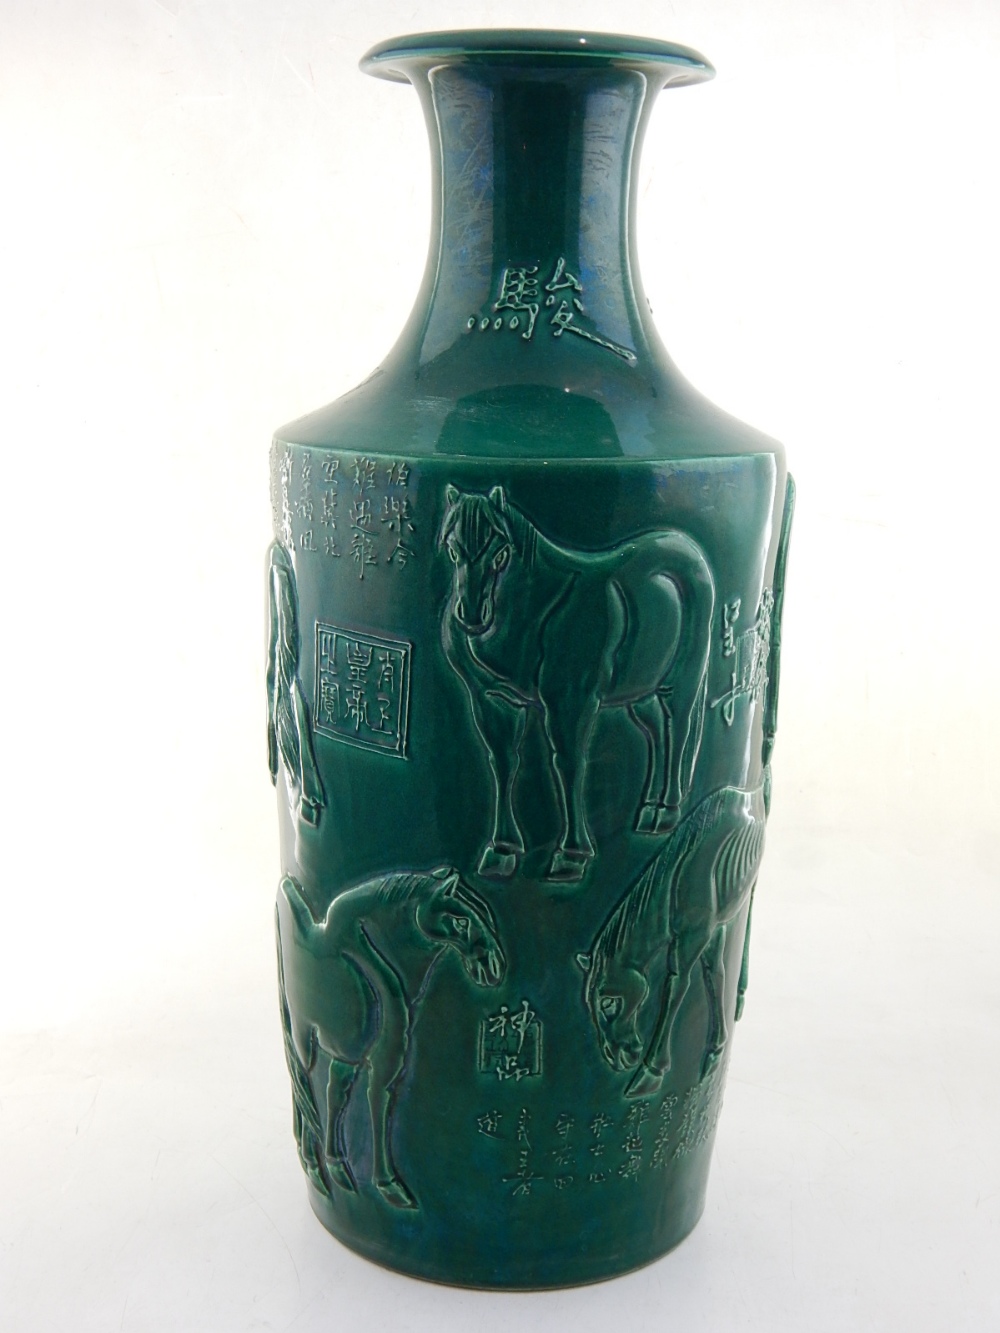 A Chinese green glazed porcelain vase, the body moulded with horses and script, H. 47cm. - Image 9 of 14